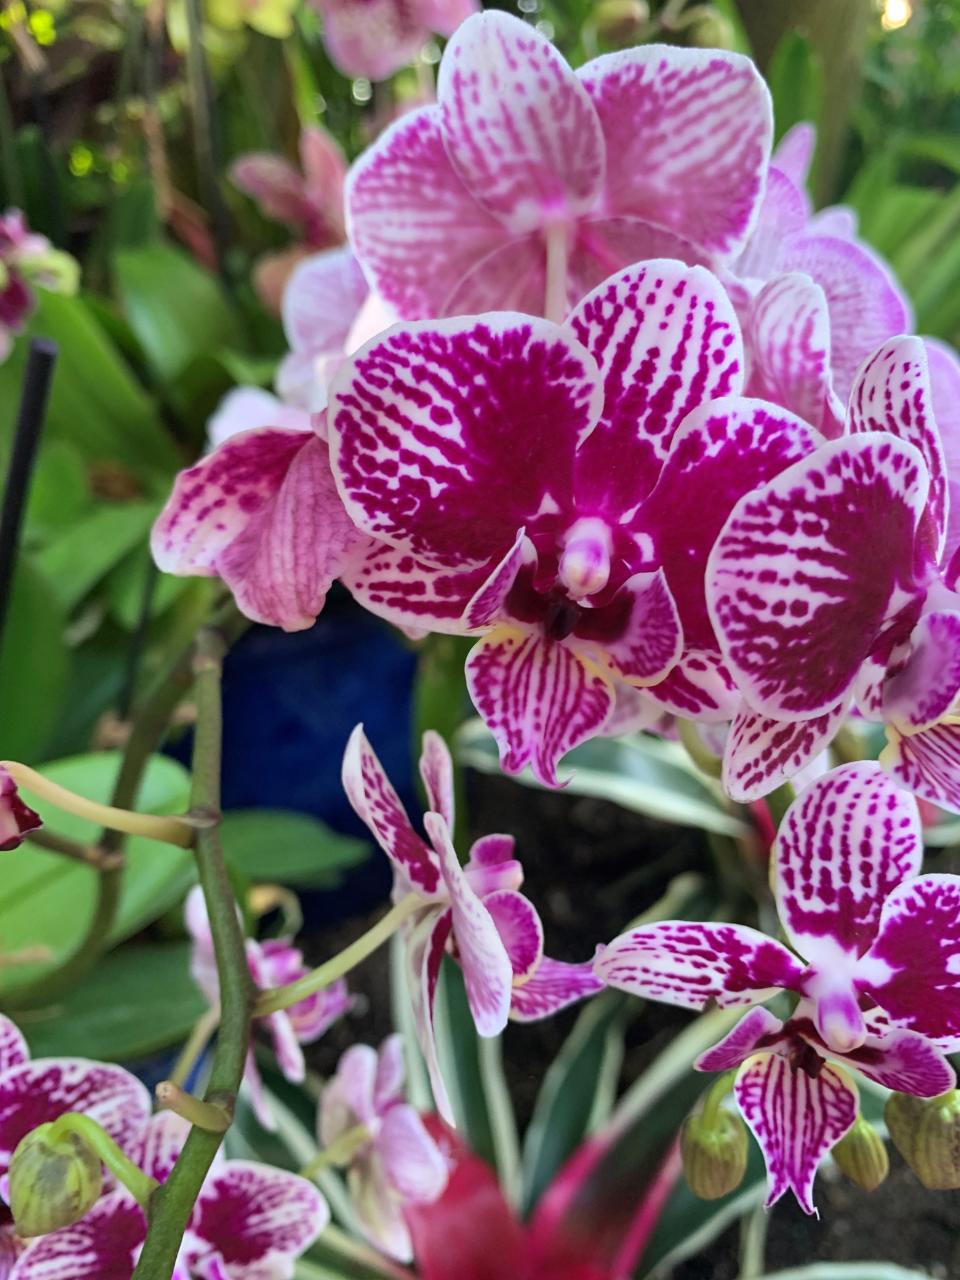 "Welcome to the Orchid Jungle" at the Kiwanis Island Park gymnasium on Merritt Island on May 3 through 6. Visit platinumcoastorchidsociety.org.